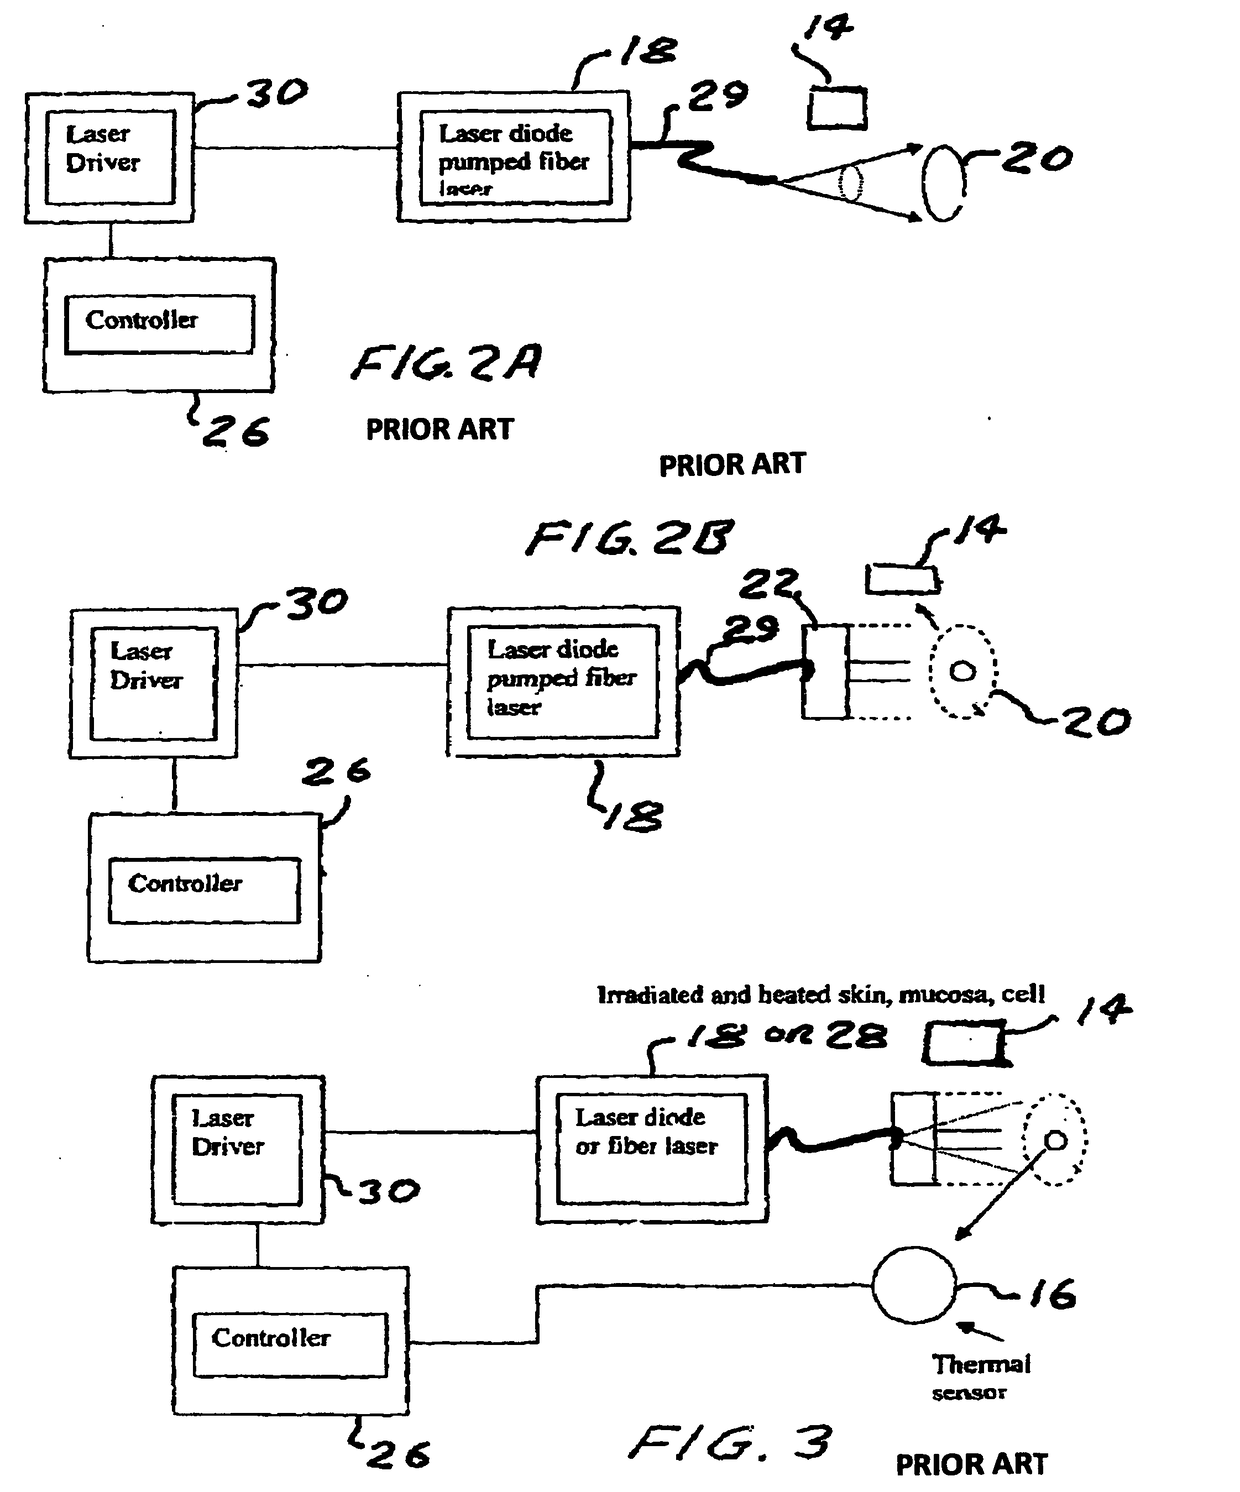 Method and device to investigate or treat painful neuropathy